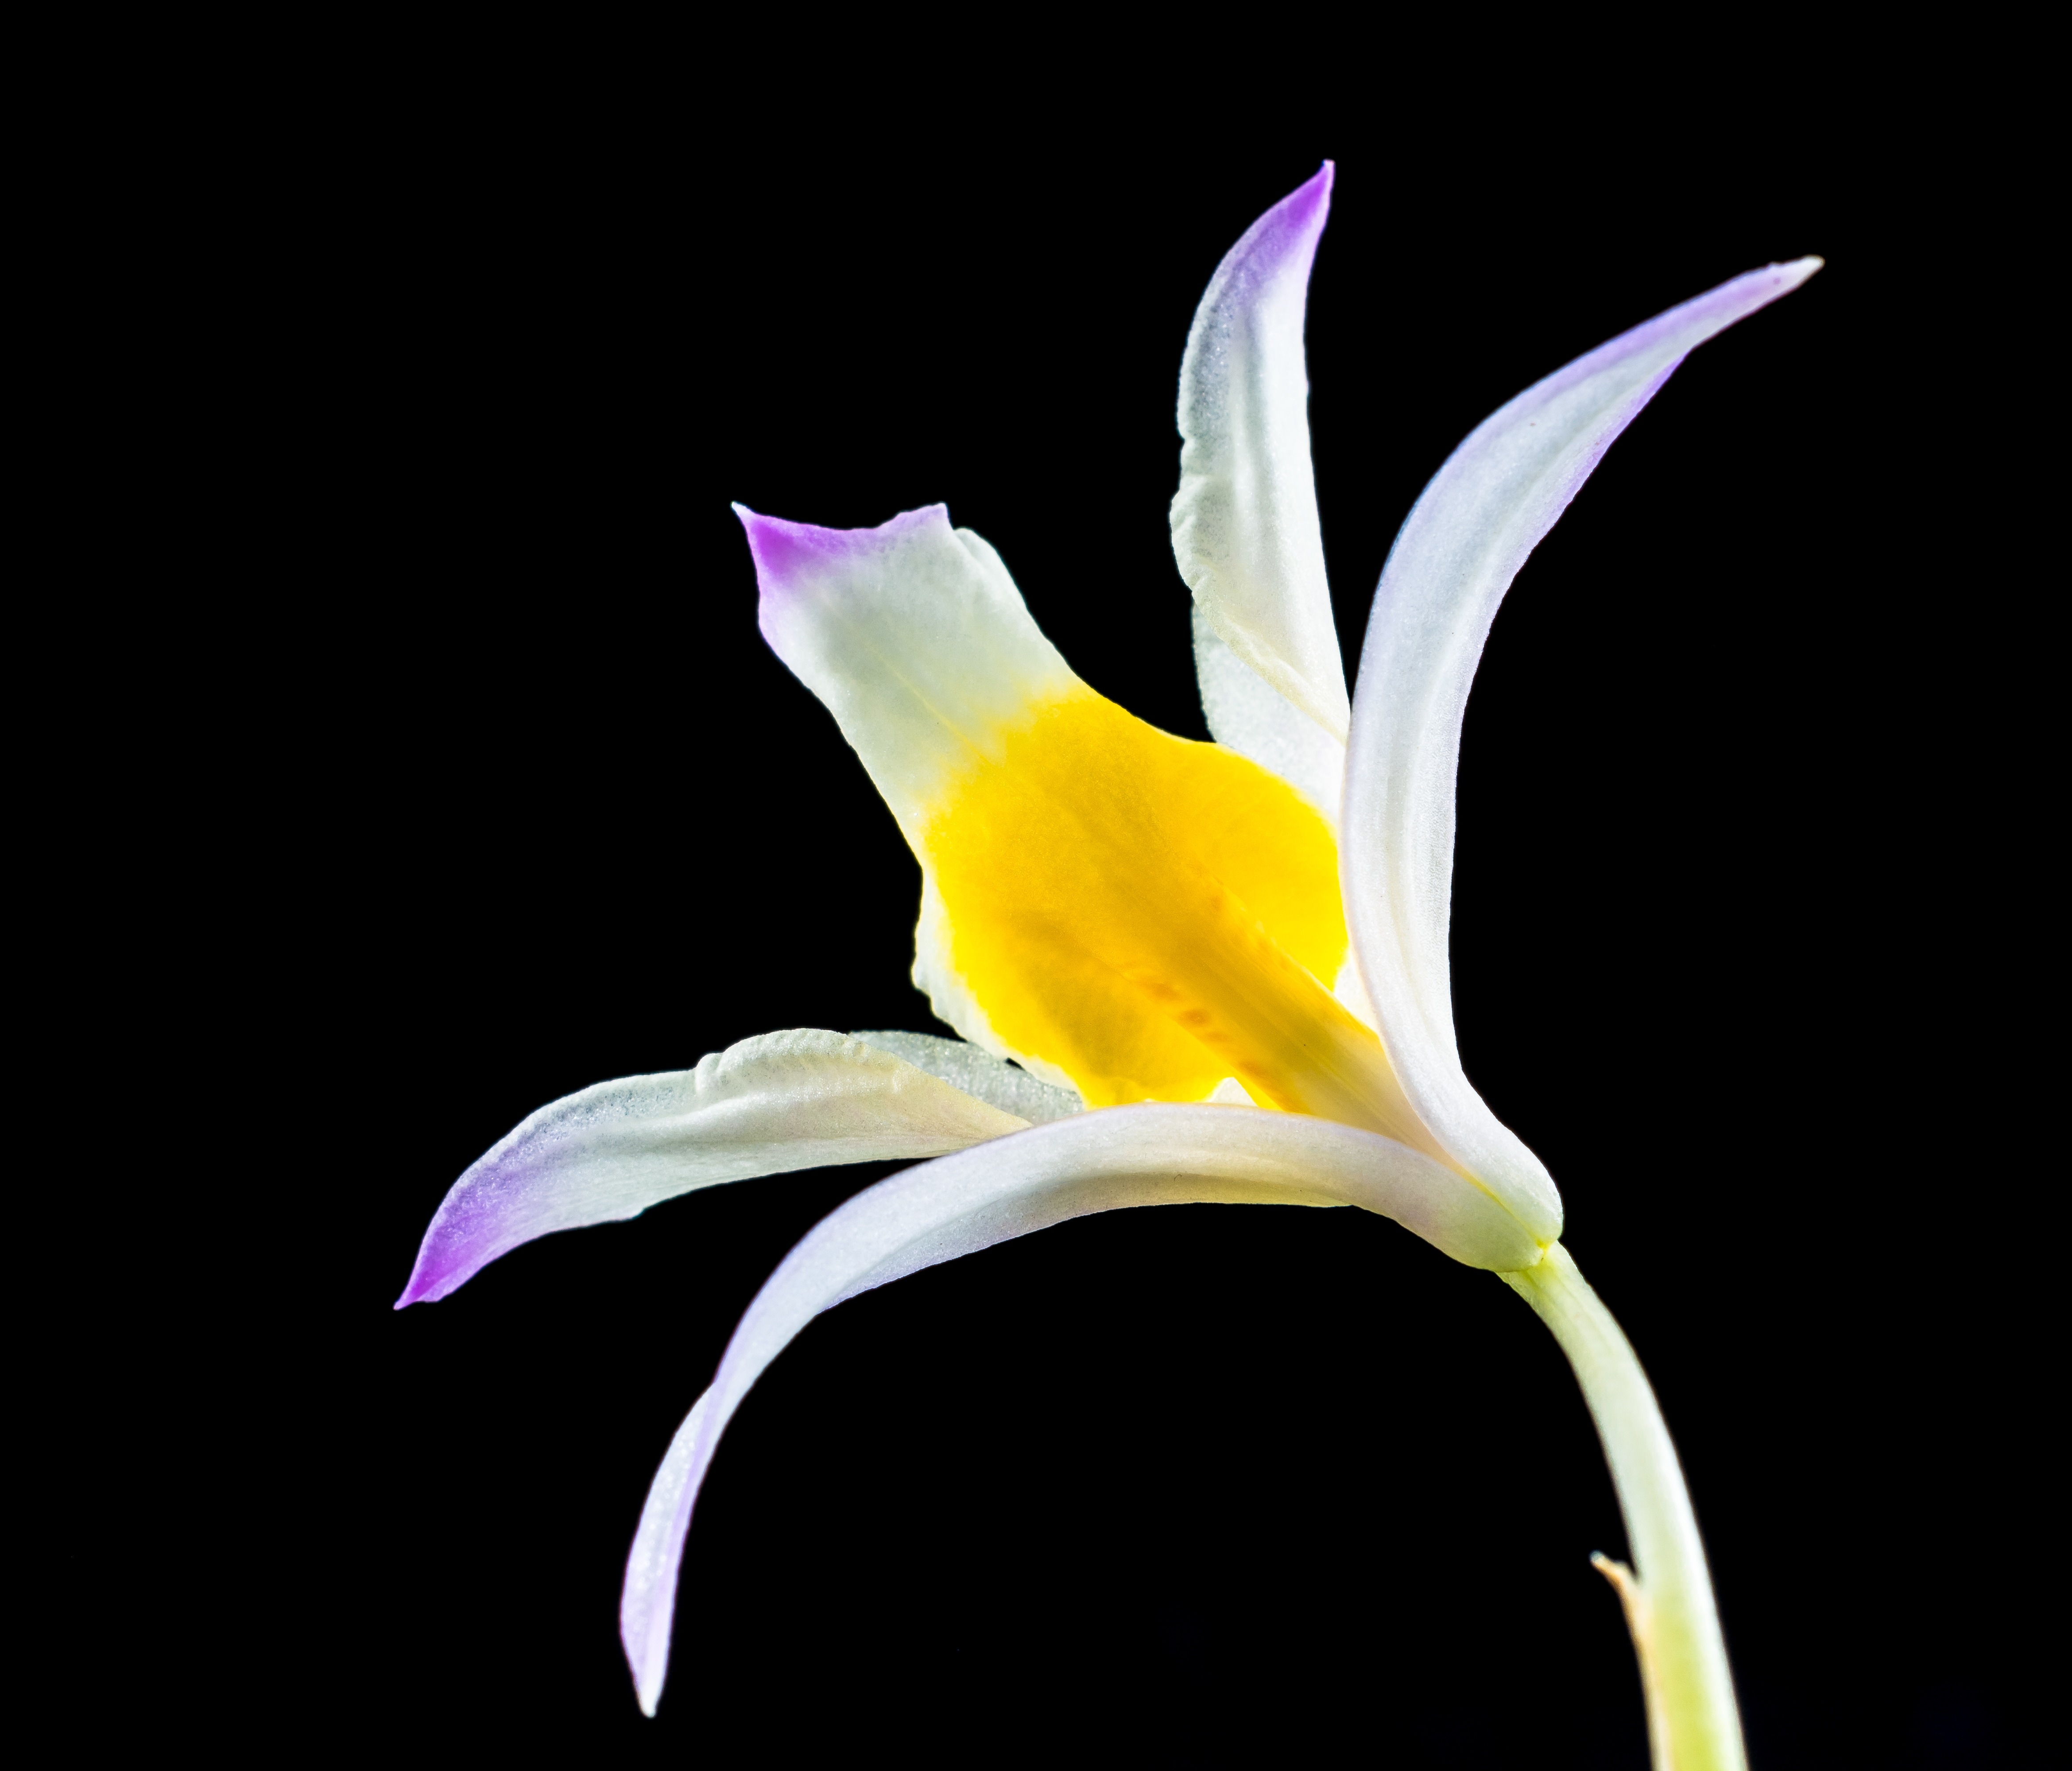 Wild Orchid, Orchid, Flower, Blossom, black background, yellow